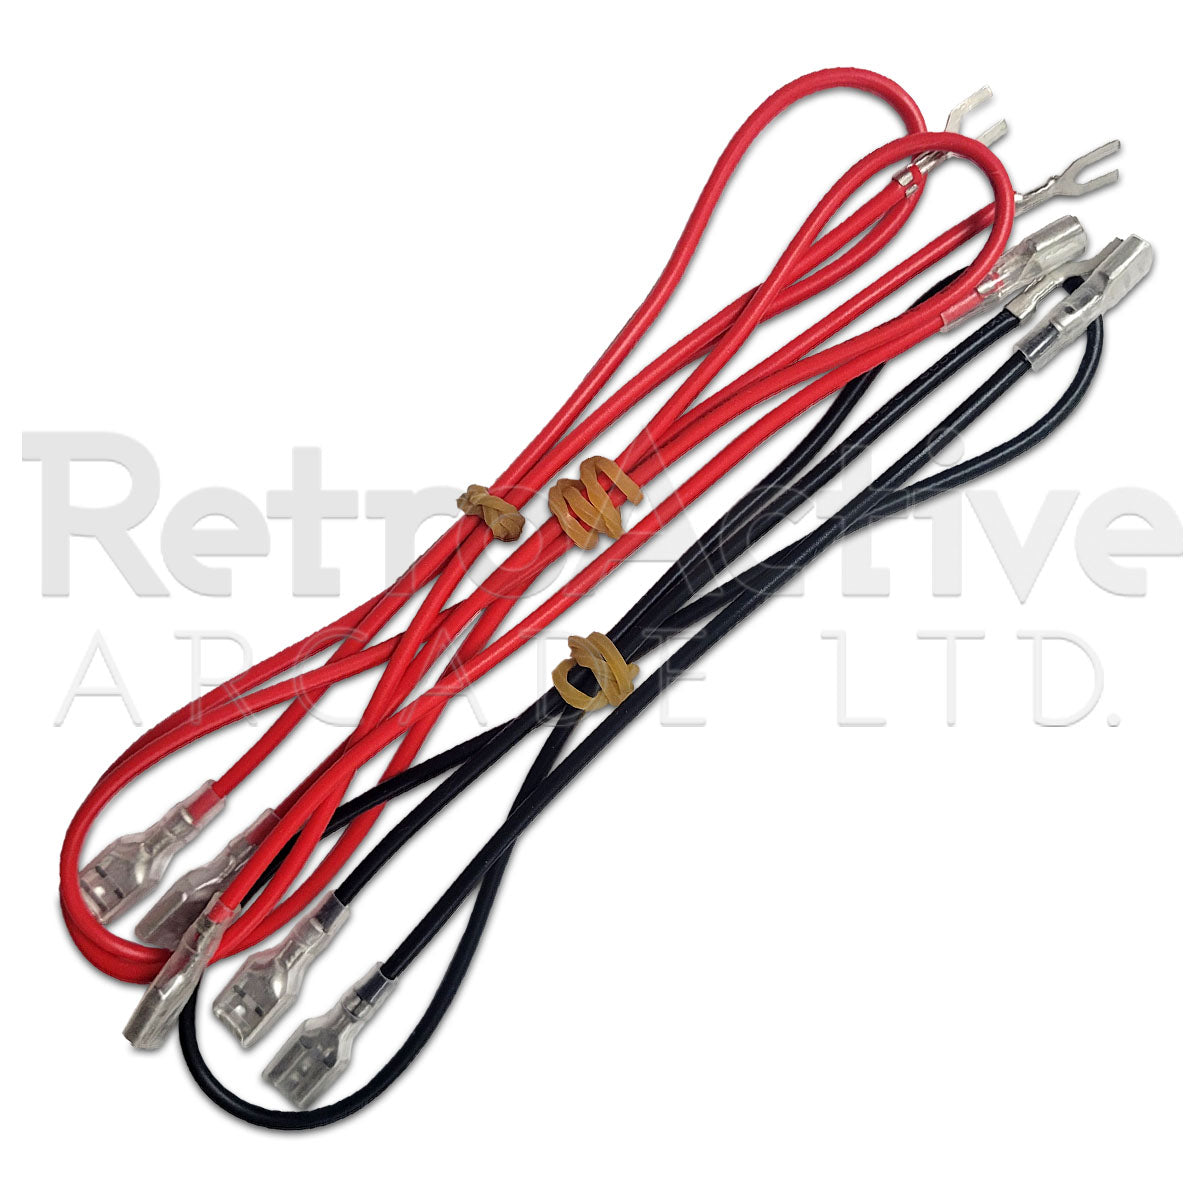 LED Power Switch Wires Power Solutions Universal - Retro Active Arcade